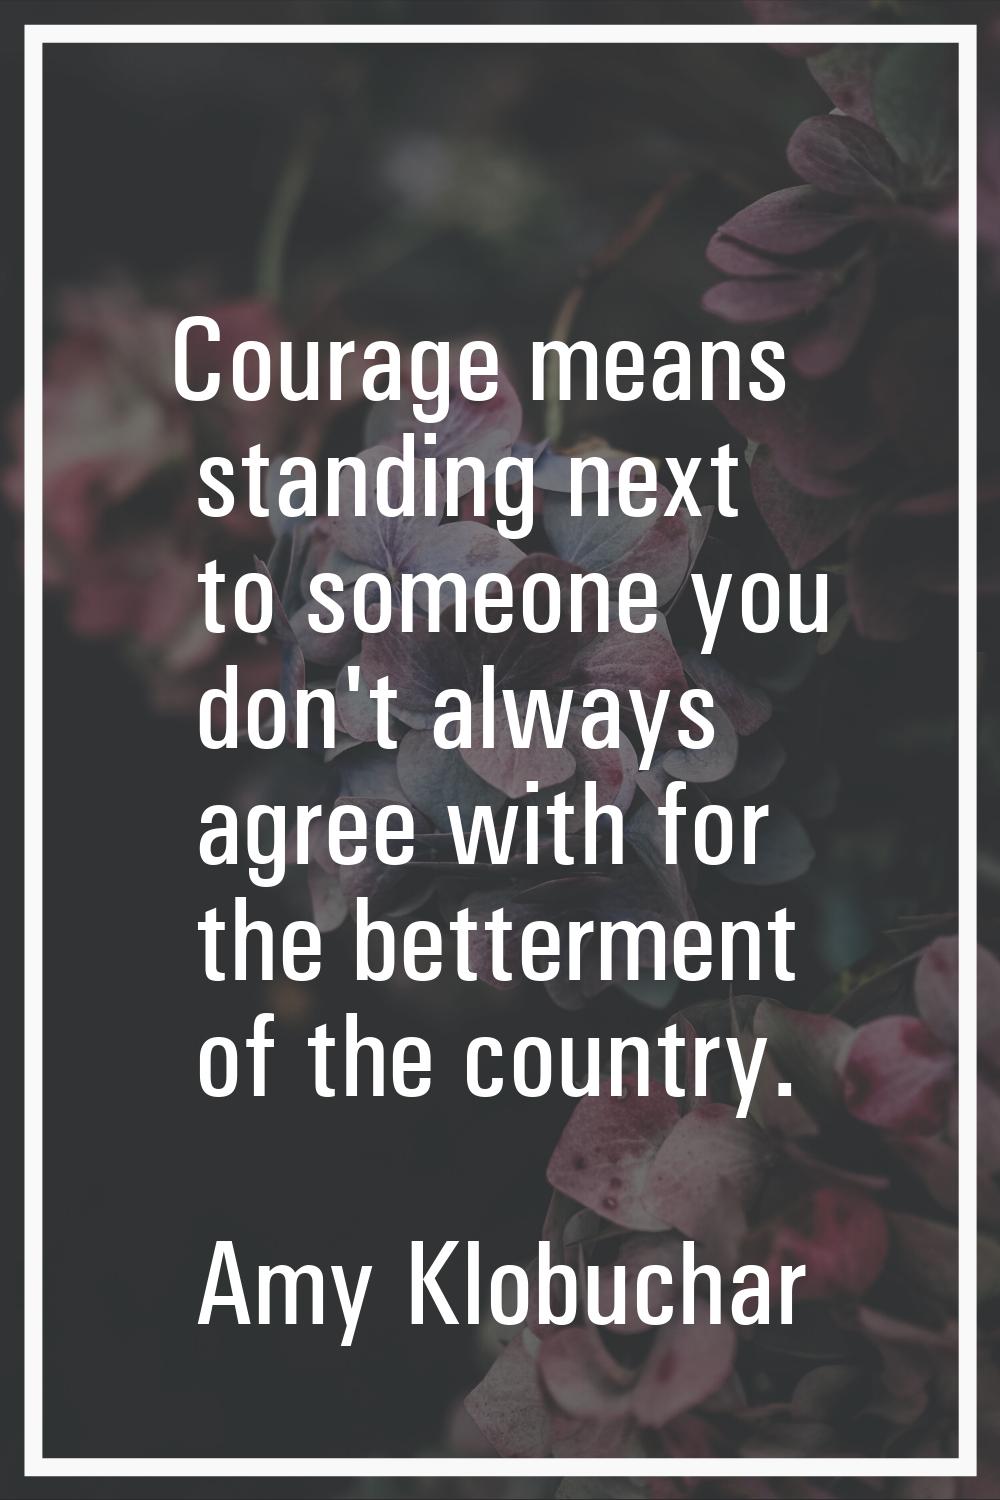 Courage means standing next to someone you don't always agree with for the betterment of the countr